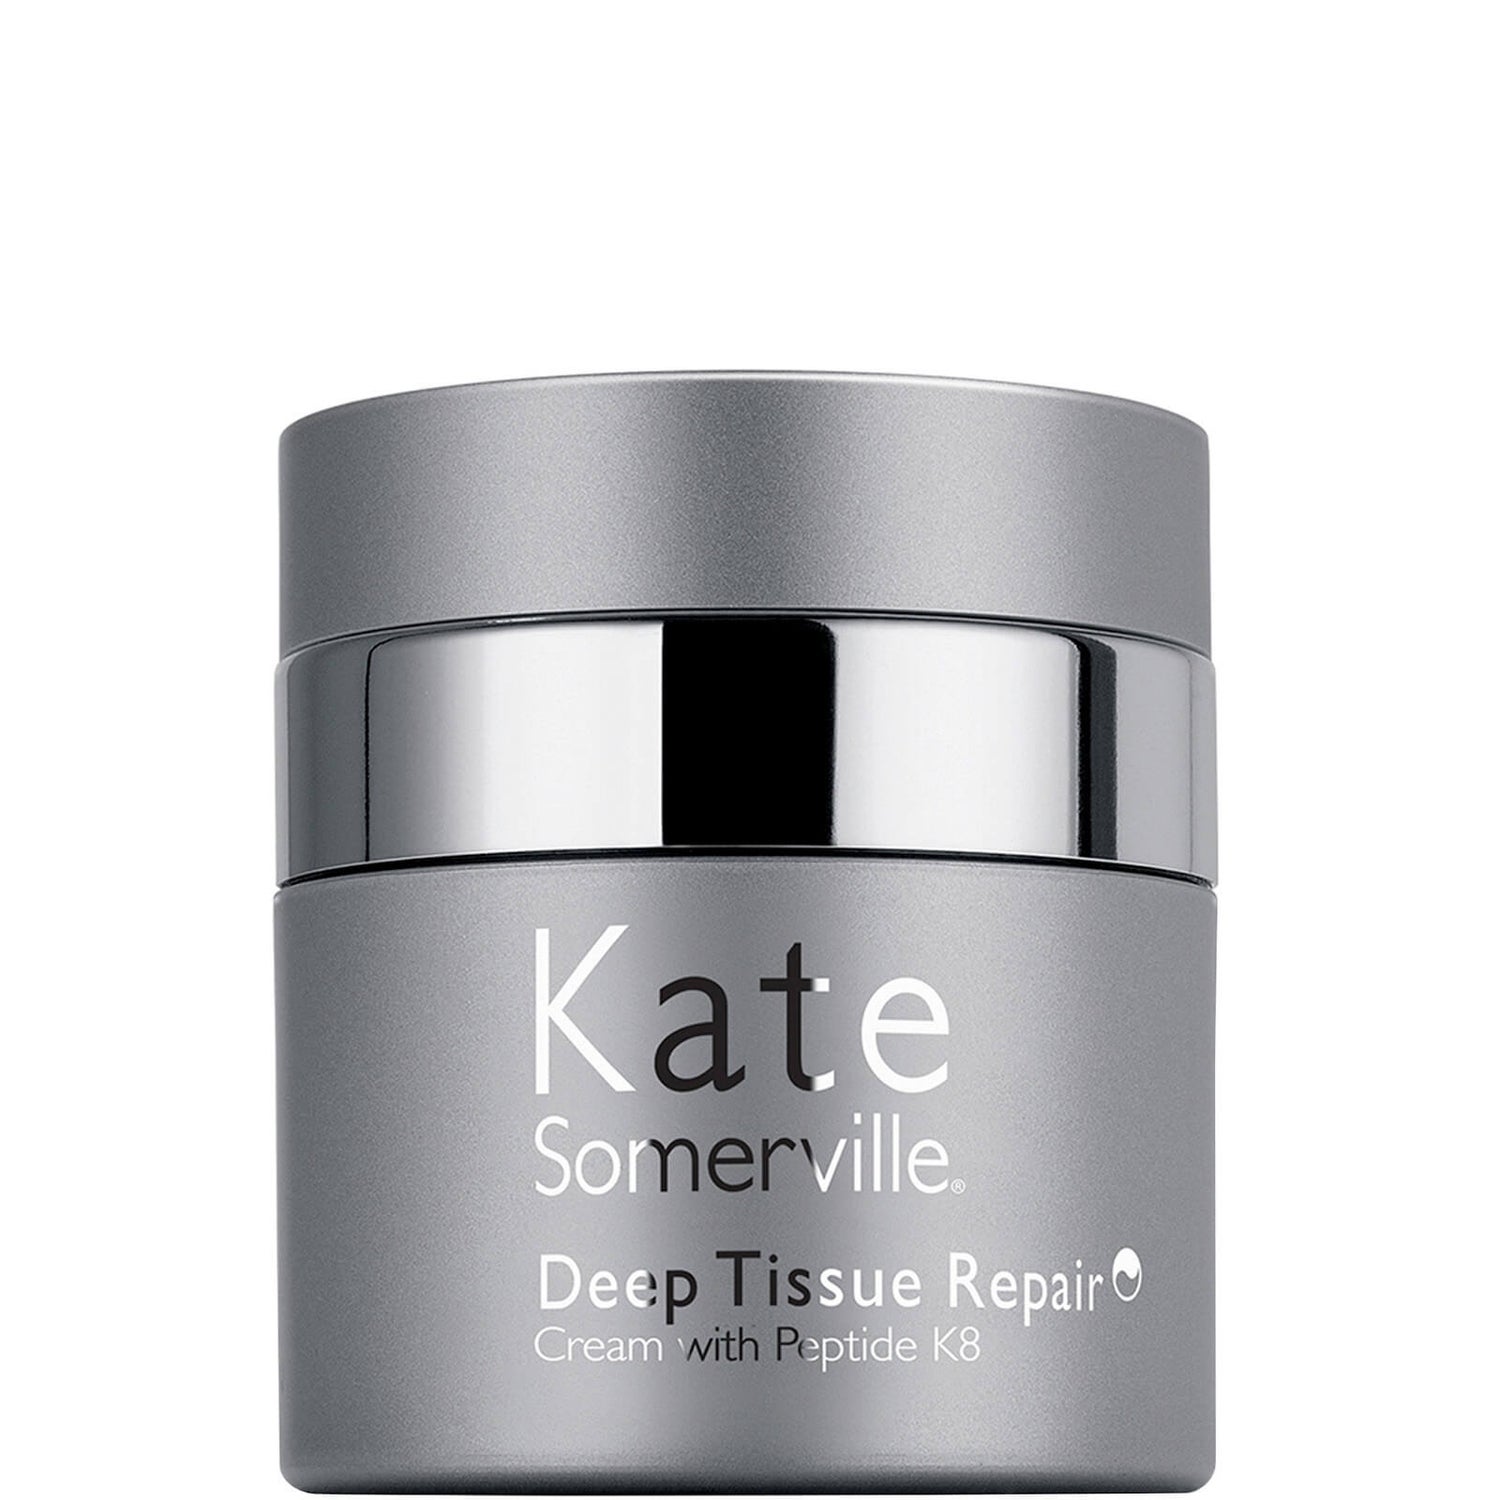 Kate Somerville Deep Tissue Repair with Peptide K8